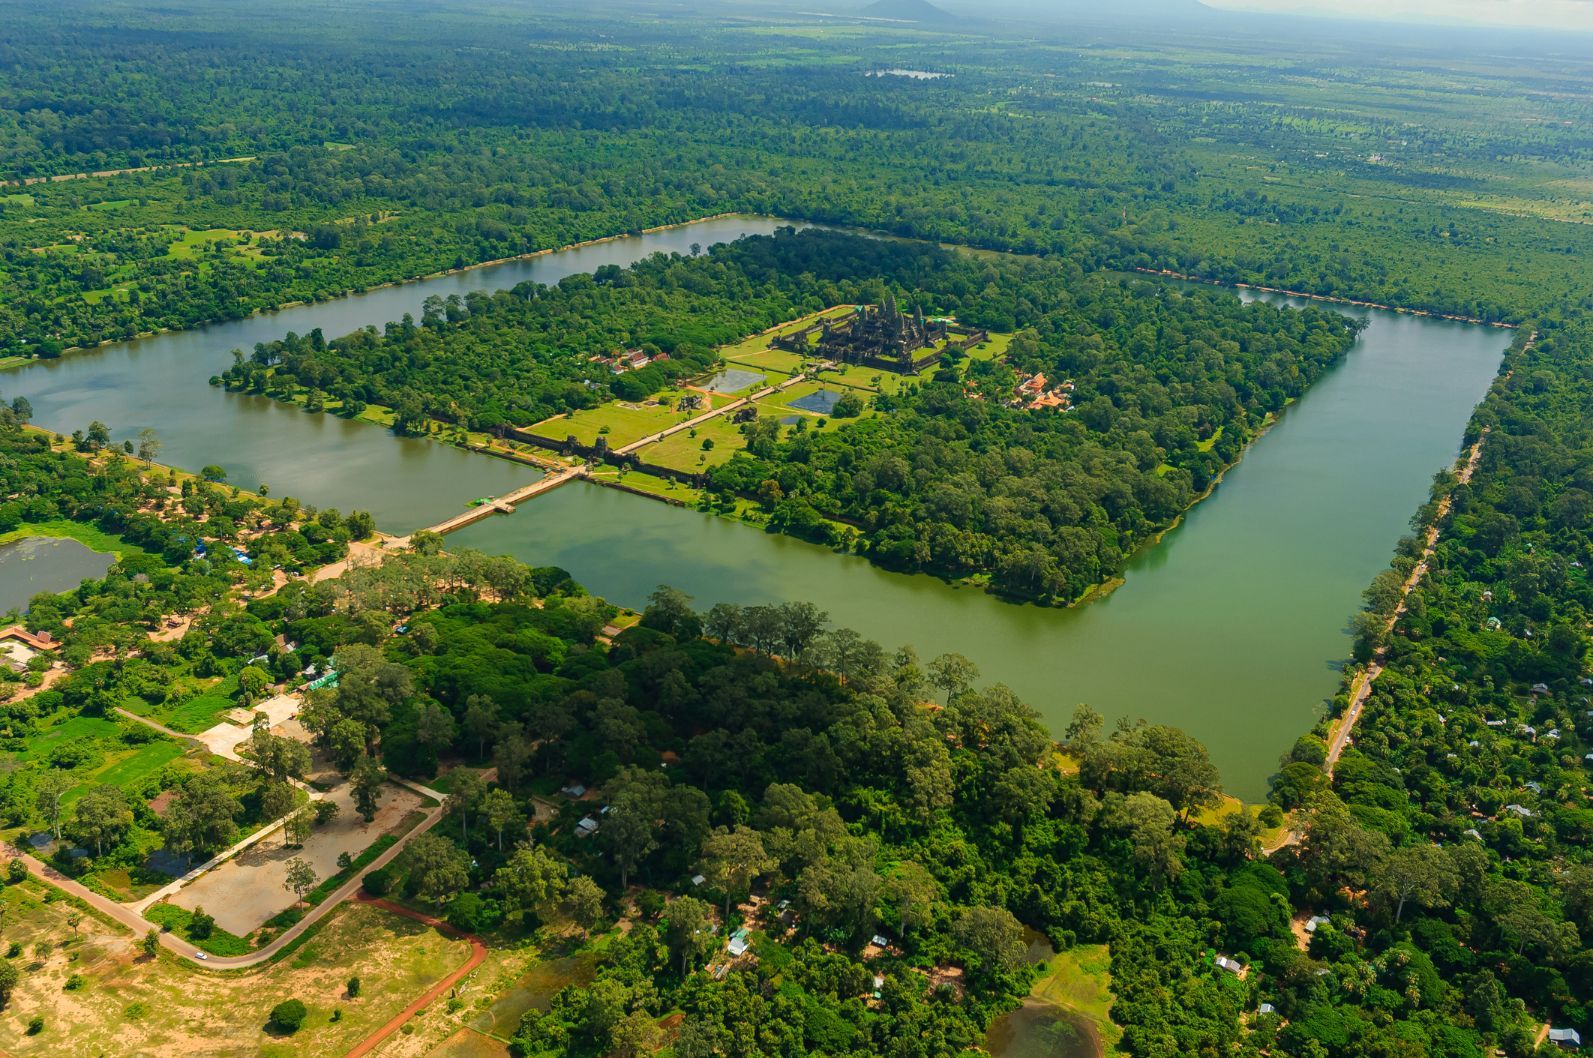 An arial view of Angkor Wat, which shows the scale of the moat that surrounds it. Photo: Getty